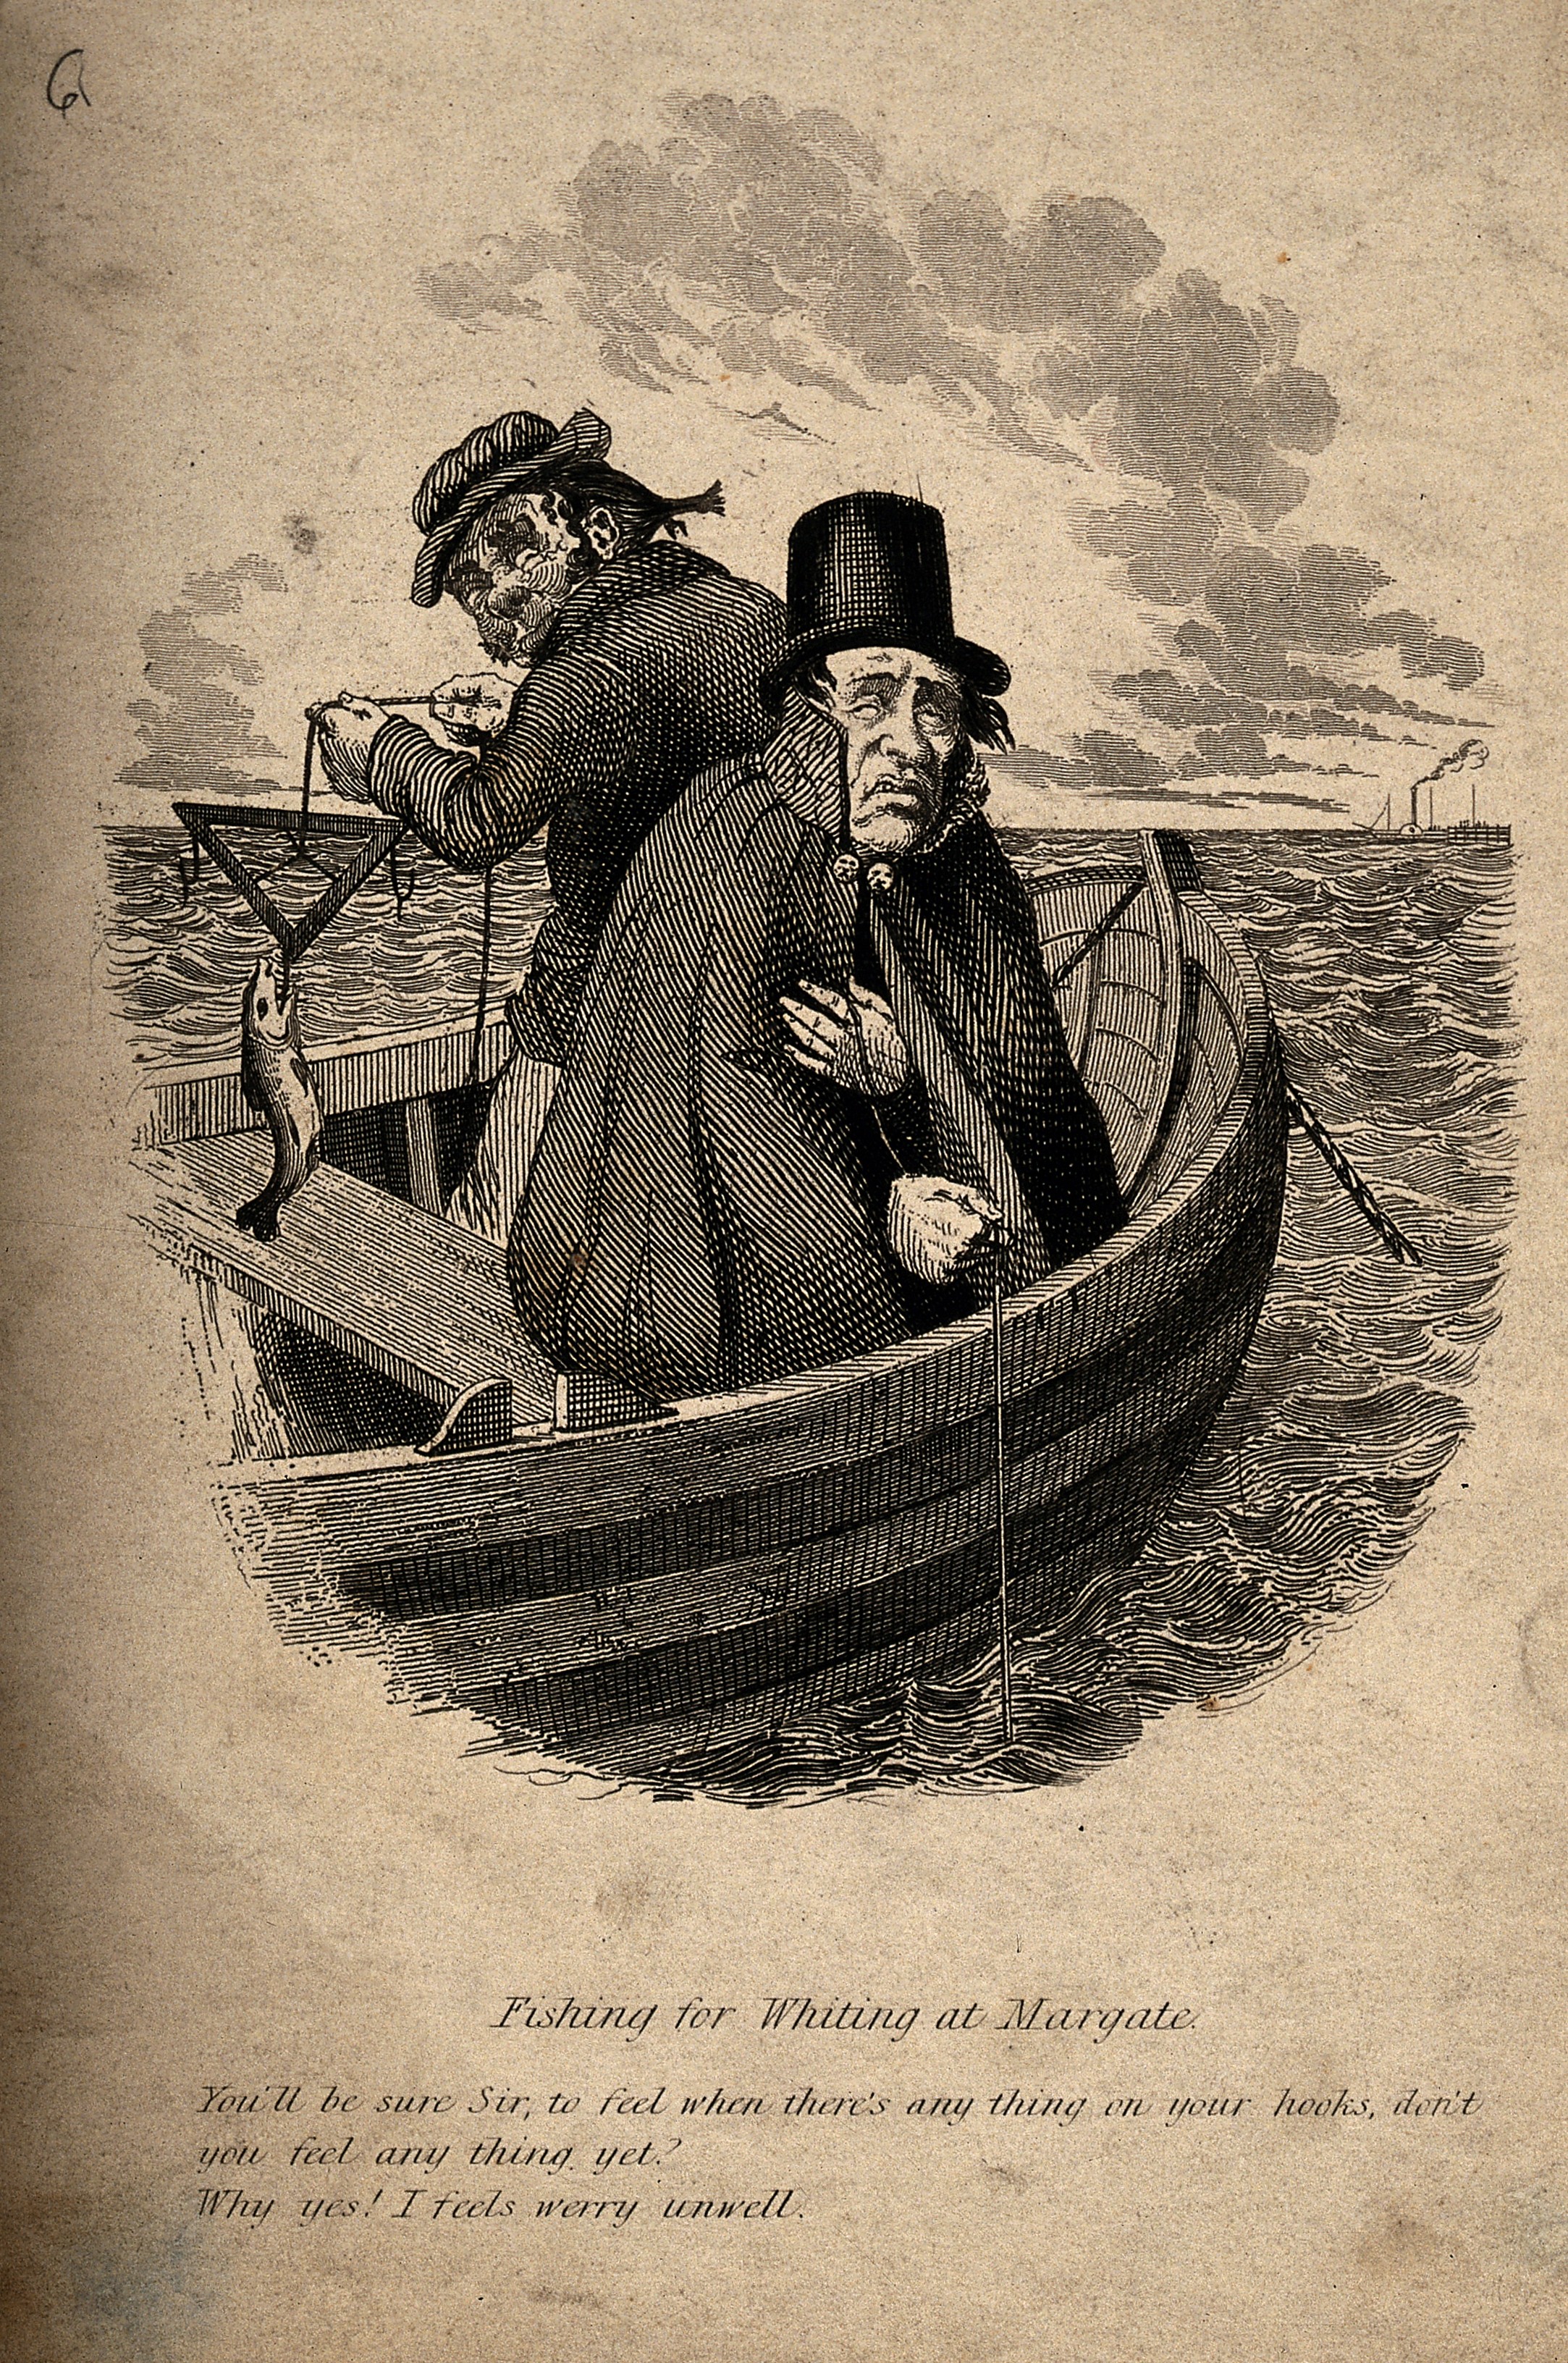 File:Two men at sea in a fishing boat; one leans over the side, f Wellcome  V0010889.jpg - Wikimedia Commons